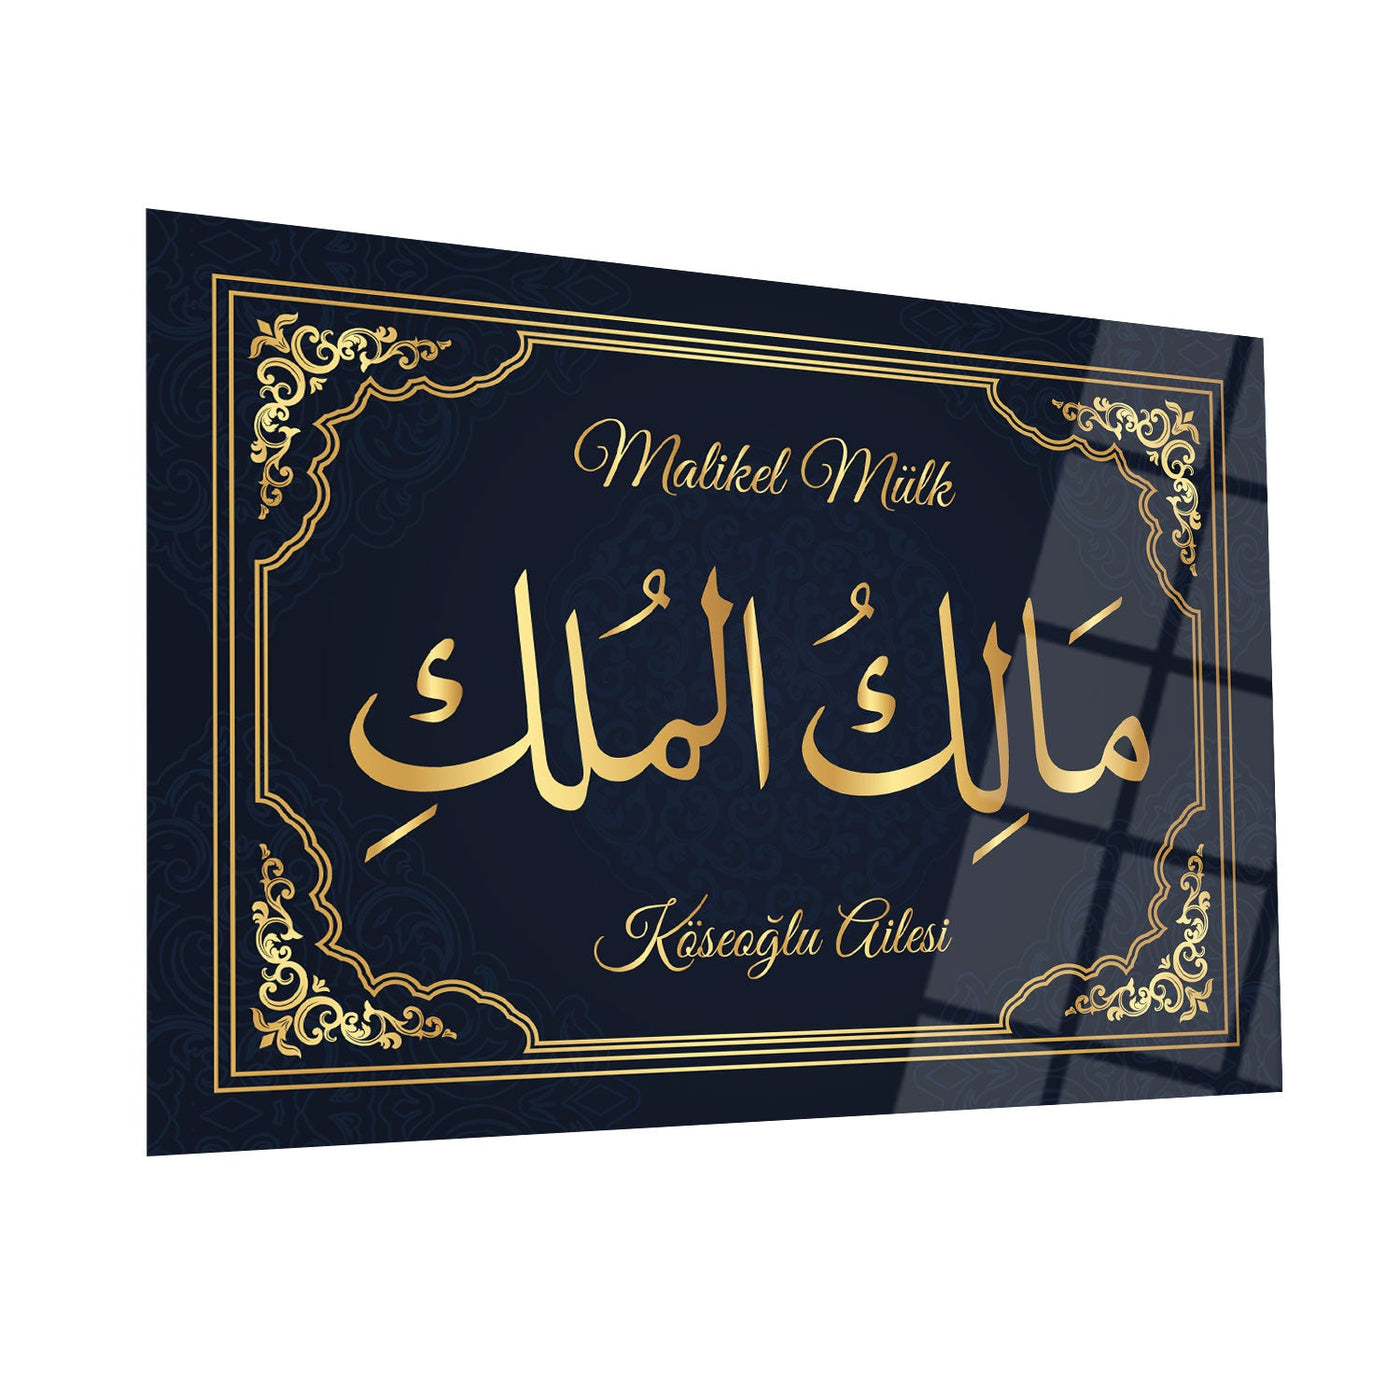 Personalized Malik-ul Mulk "The Owner of Absolute Sovereignty" Glass Islamic Wall Art - WTC031